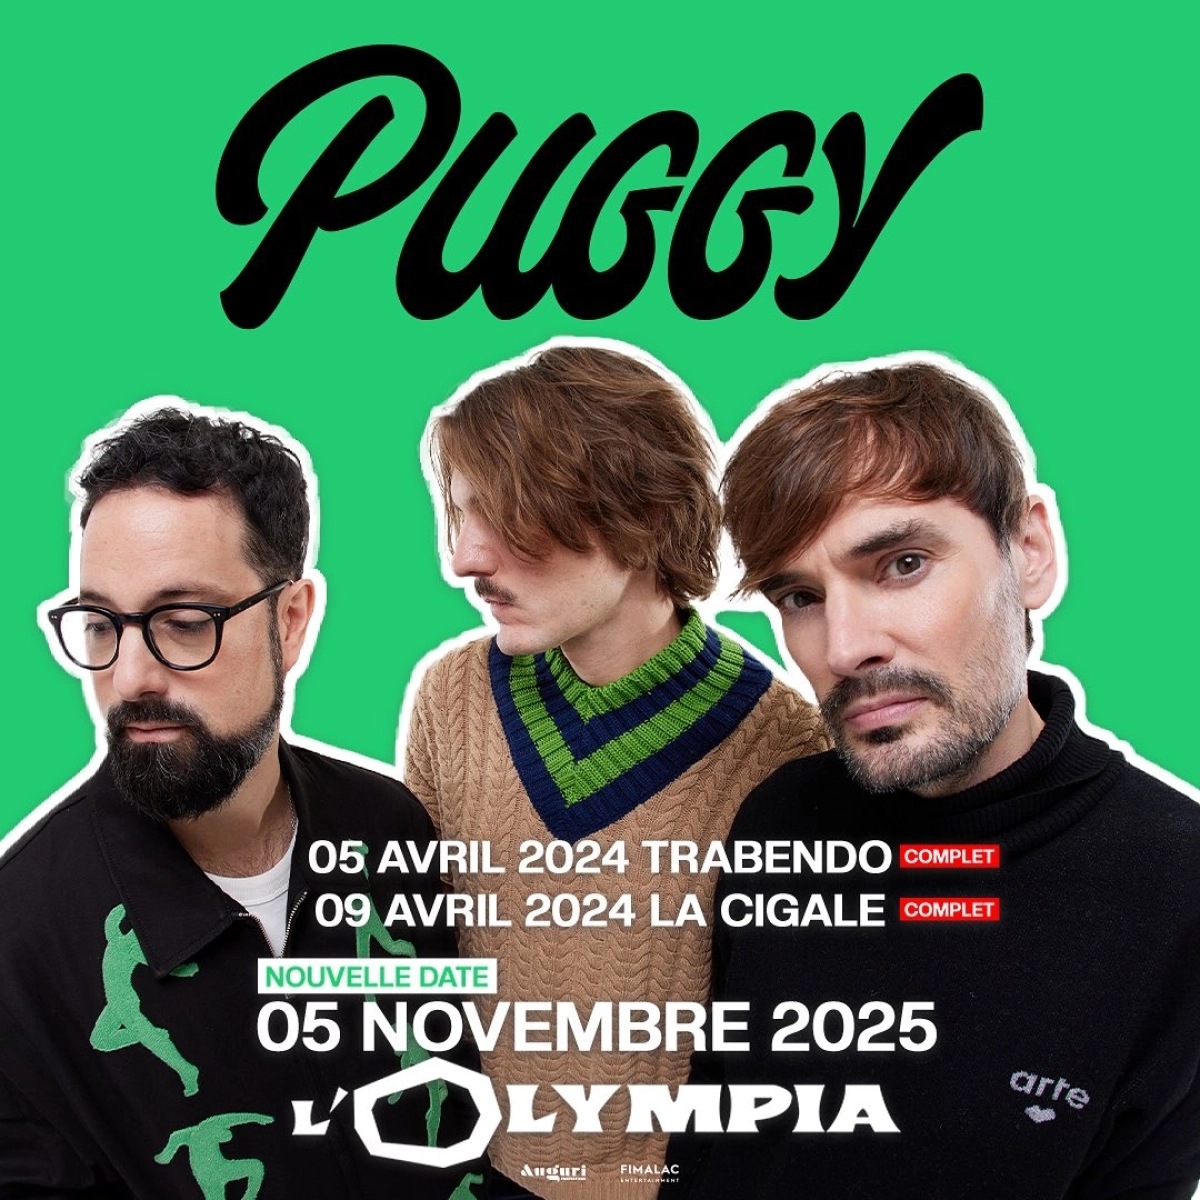 Puggy at Olympia Tickets